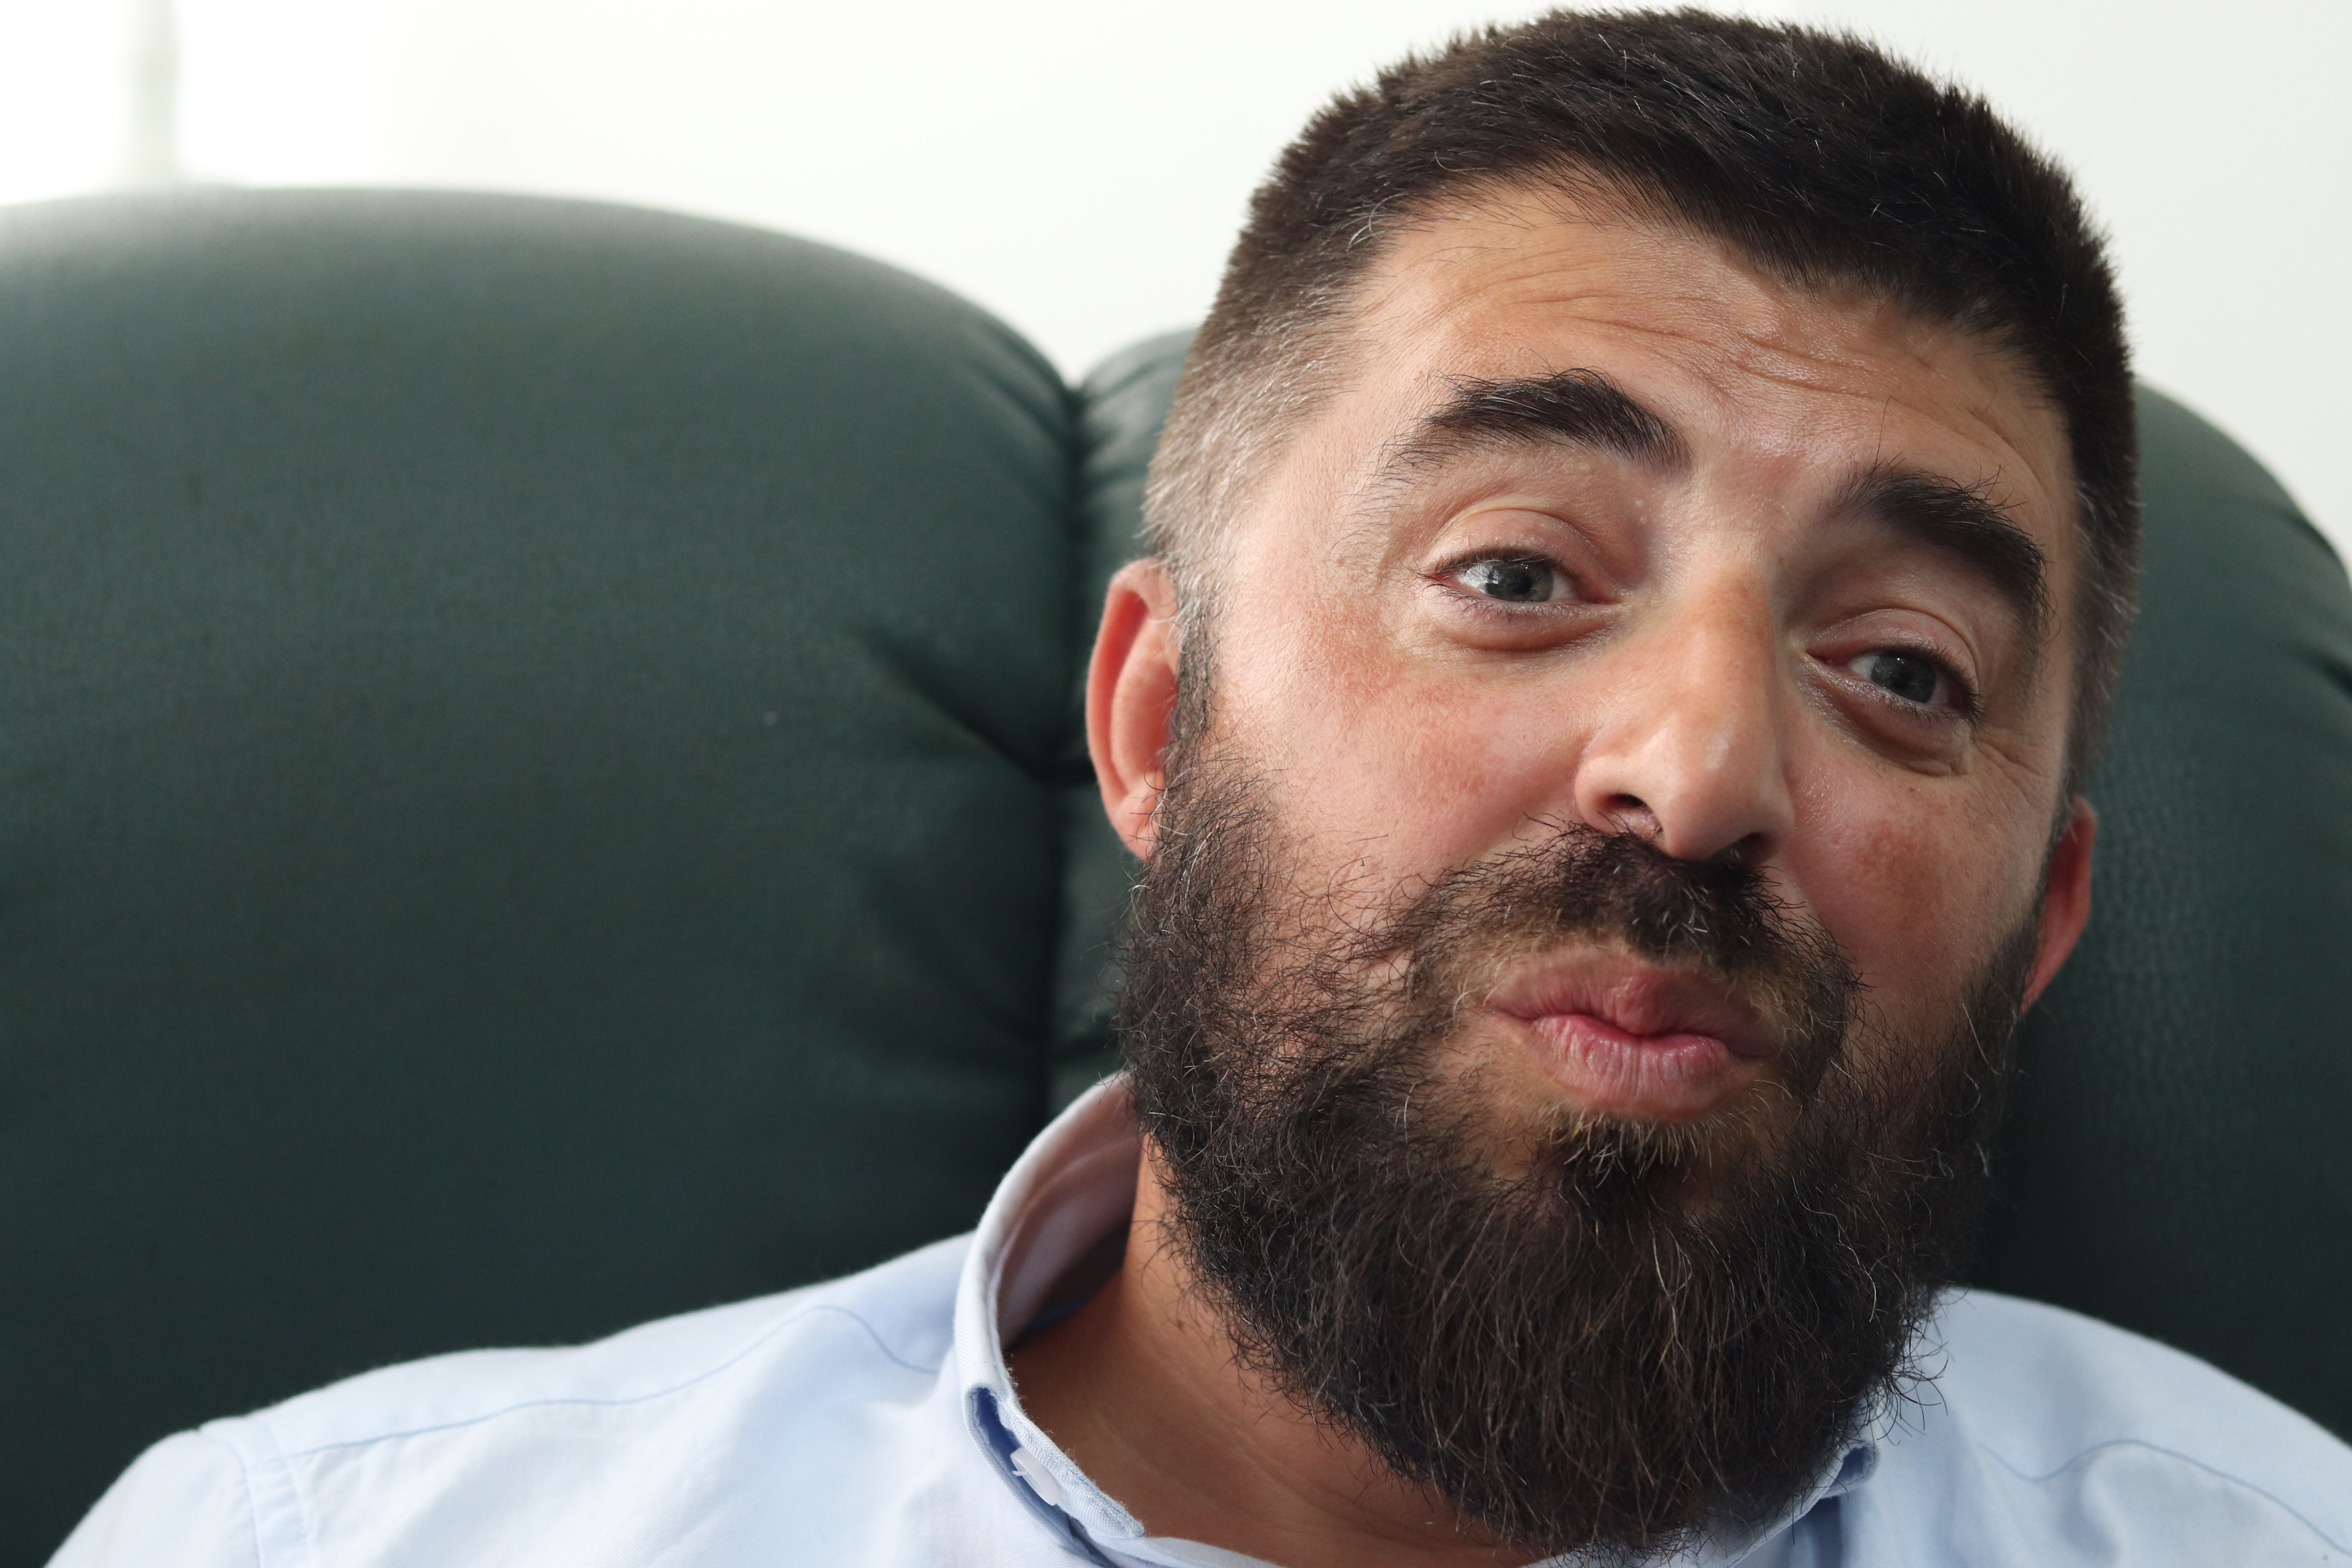 In 2014, when Kosovo realized its citizens' involvement in Middle Eastern terrorist groups, the security apparatus began a ferocious crackdown on people suspected of terrorist activities, including some controversial imams. One of the imams was Enes Goga, the great imam of the Islamic Community of Kosovo (BIK) in Peja, featured above, whom Naser Deva partially blames for his influencing his son’s departure. “I don’t think that I am responsible. I am a victim from the political parties. They needed to create a new problem in society besides unemployment, the economical failure, the political failure, organized crime,” Goga said. “These are the problems of our society. Islam is never a problem. Never.” Image by AJ Naddaff. Kosovo, 2018.